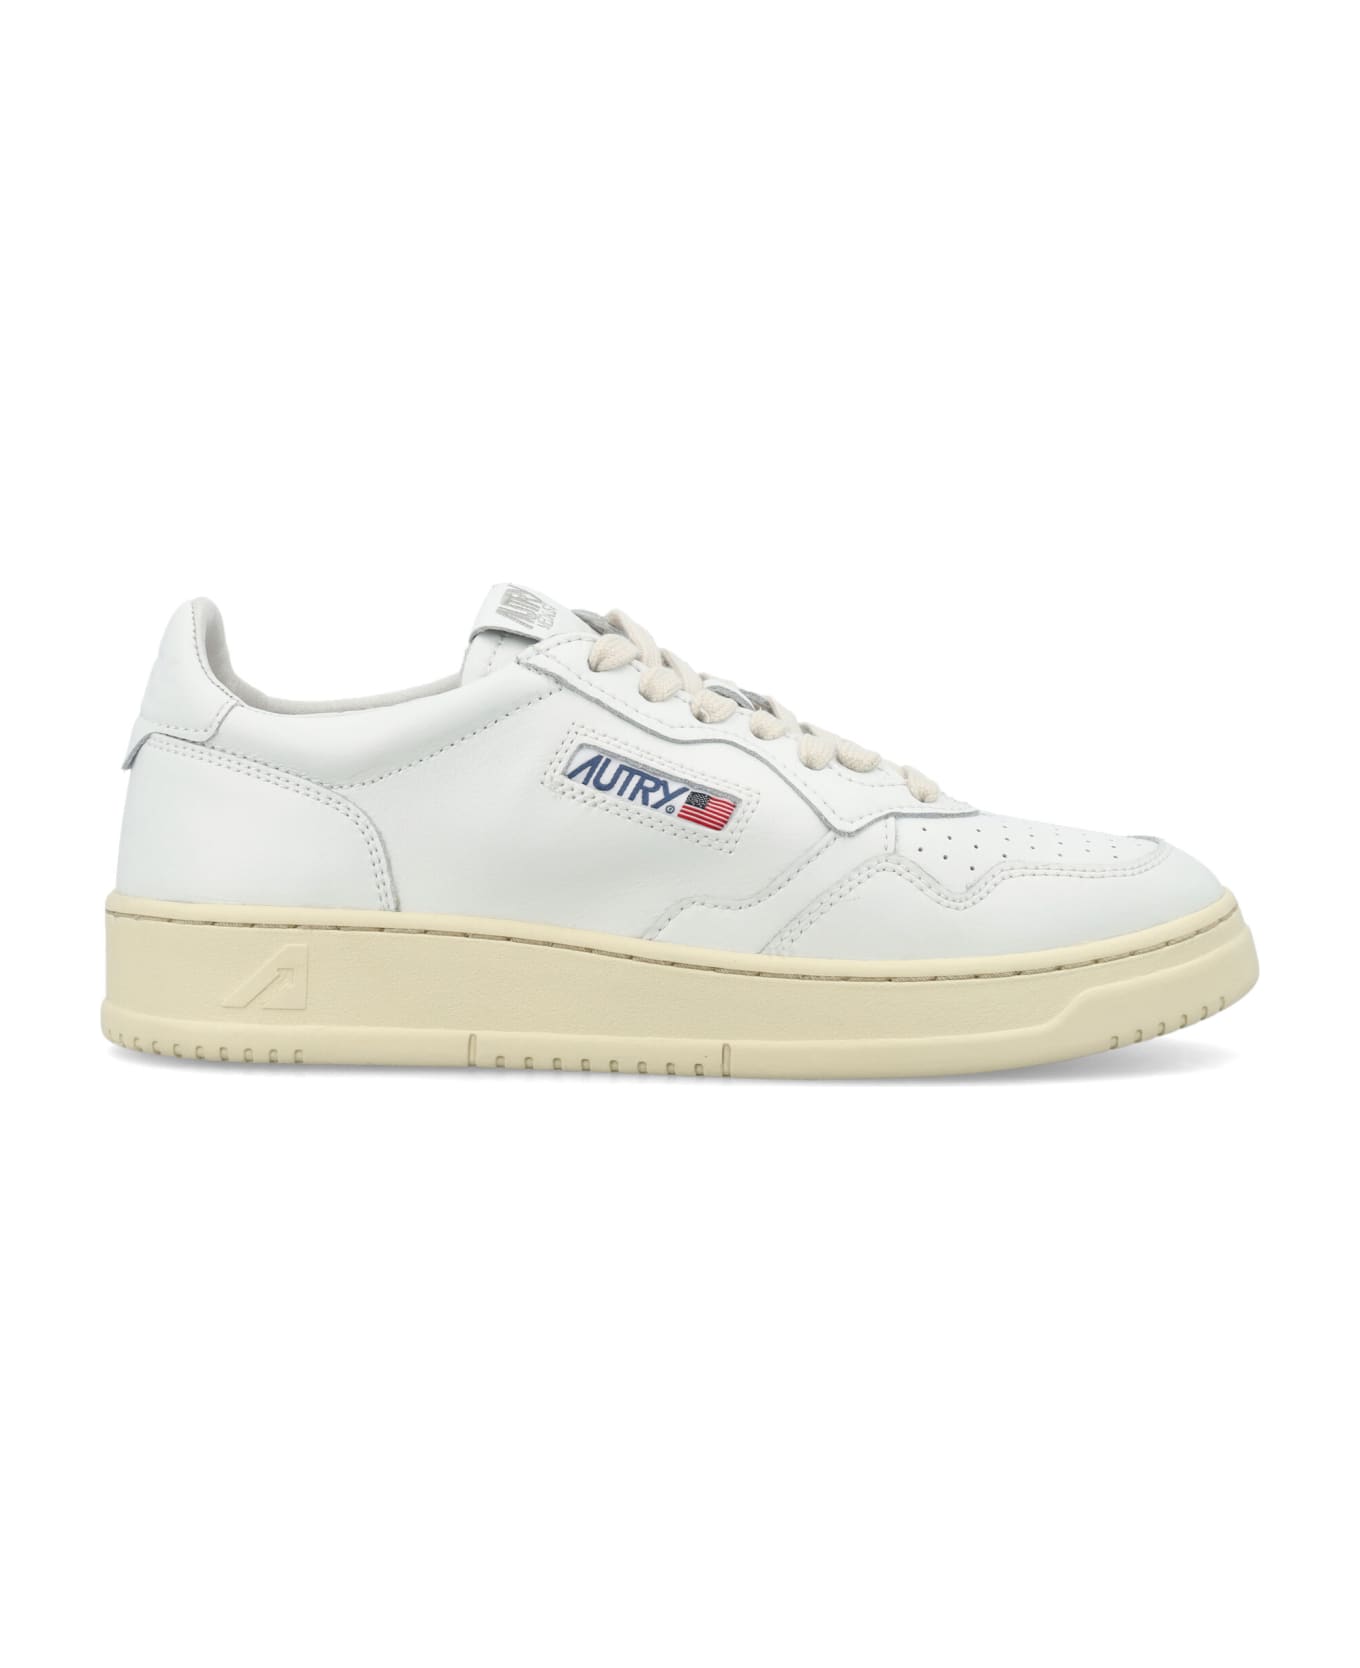 Autry Medalist Low Sneakers - WHITE WHITE